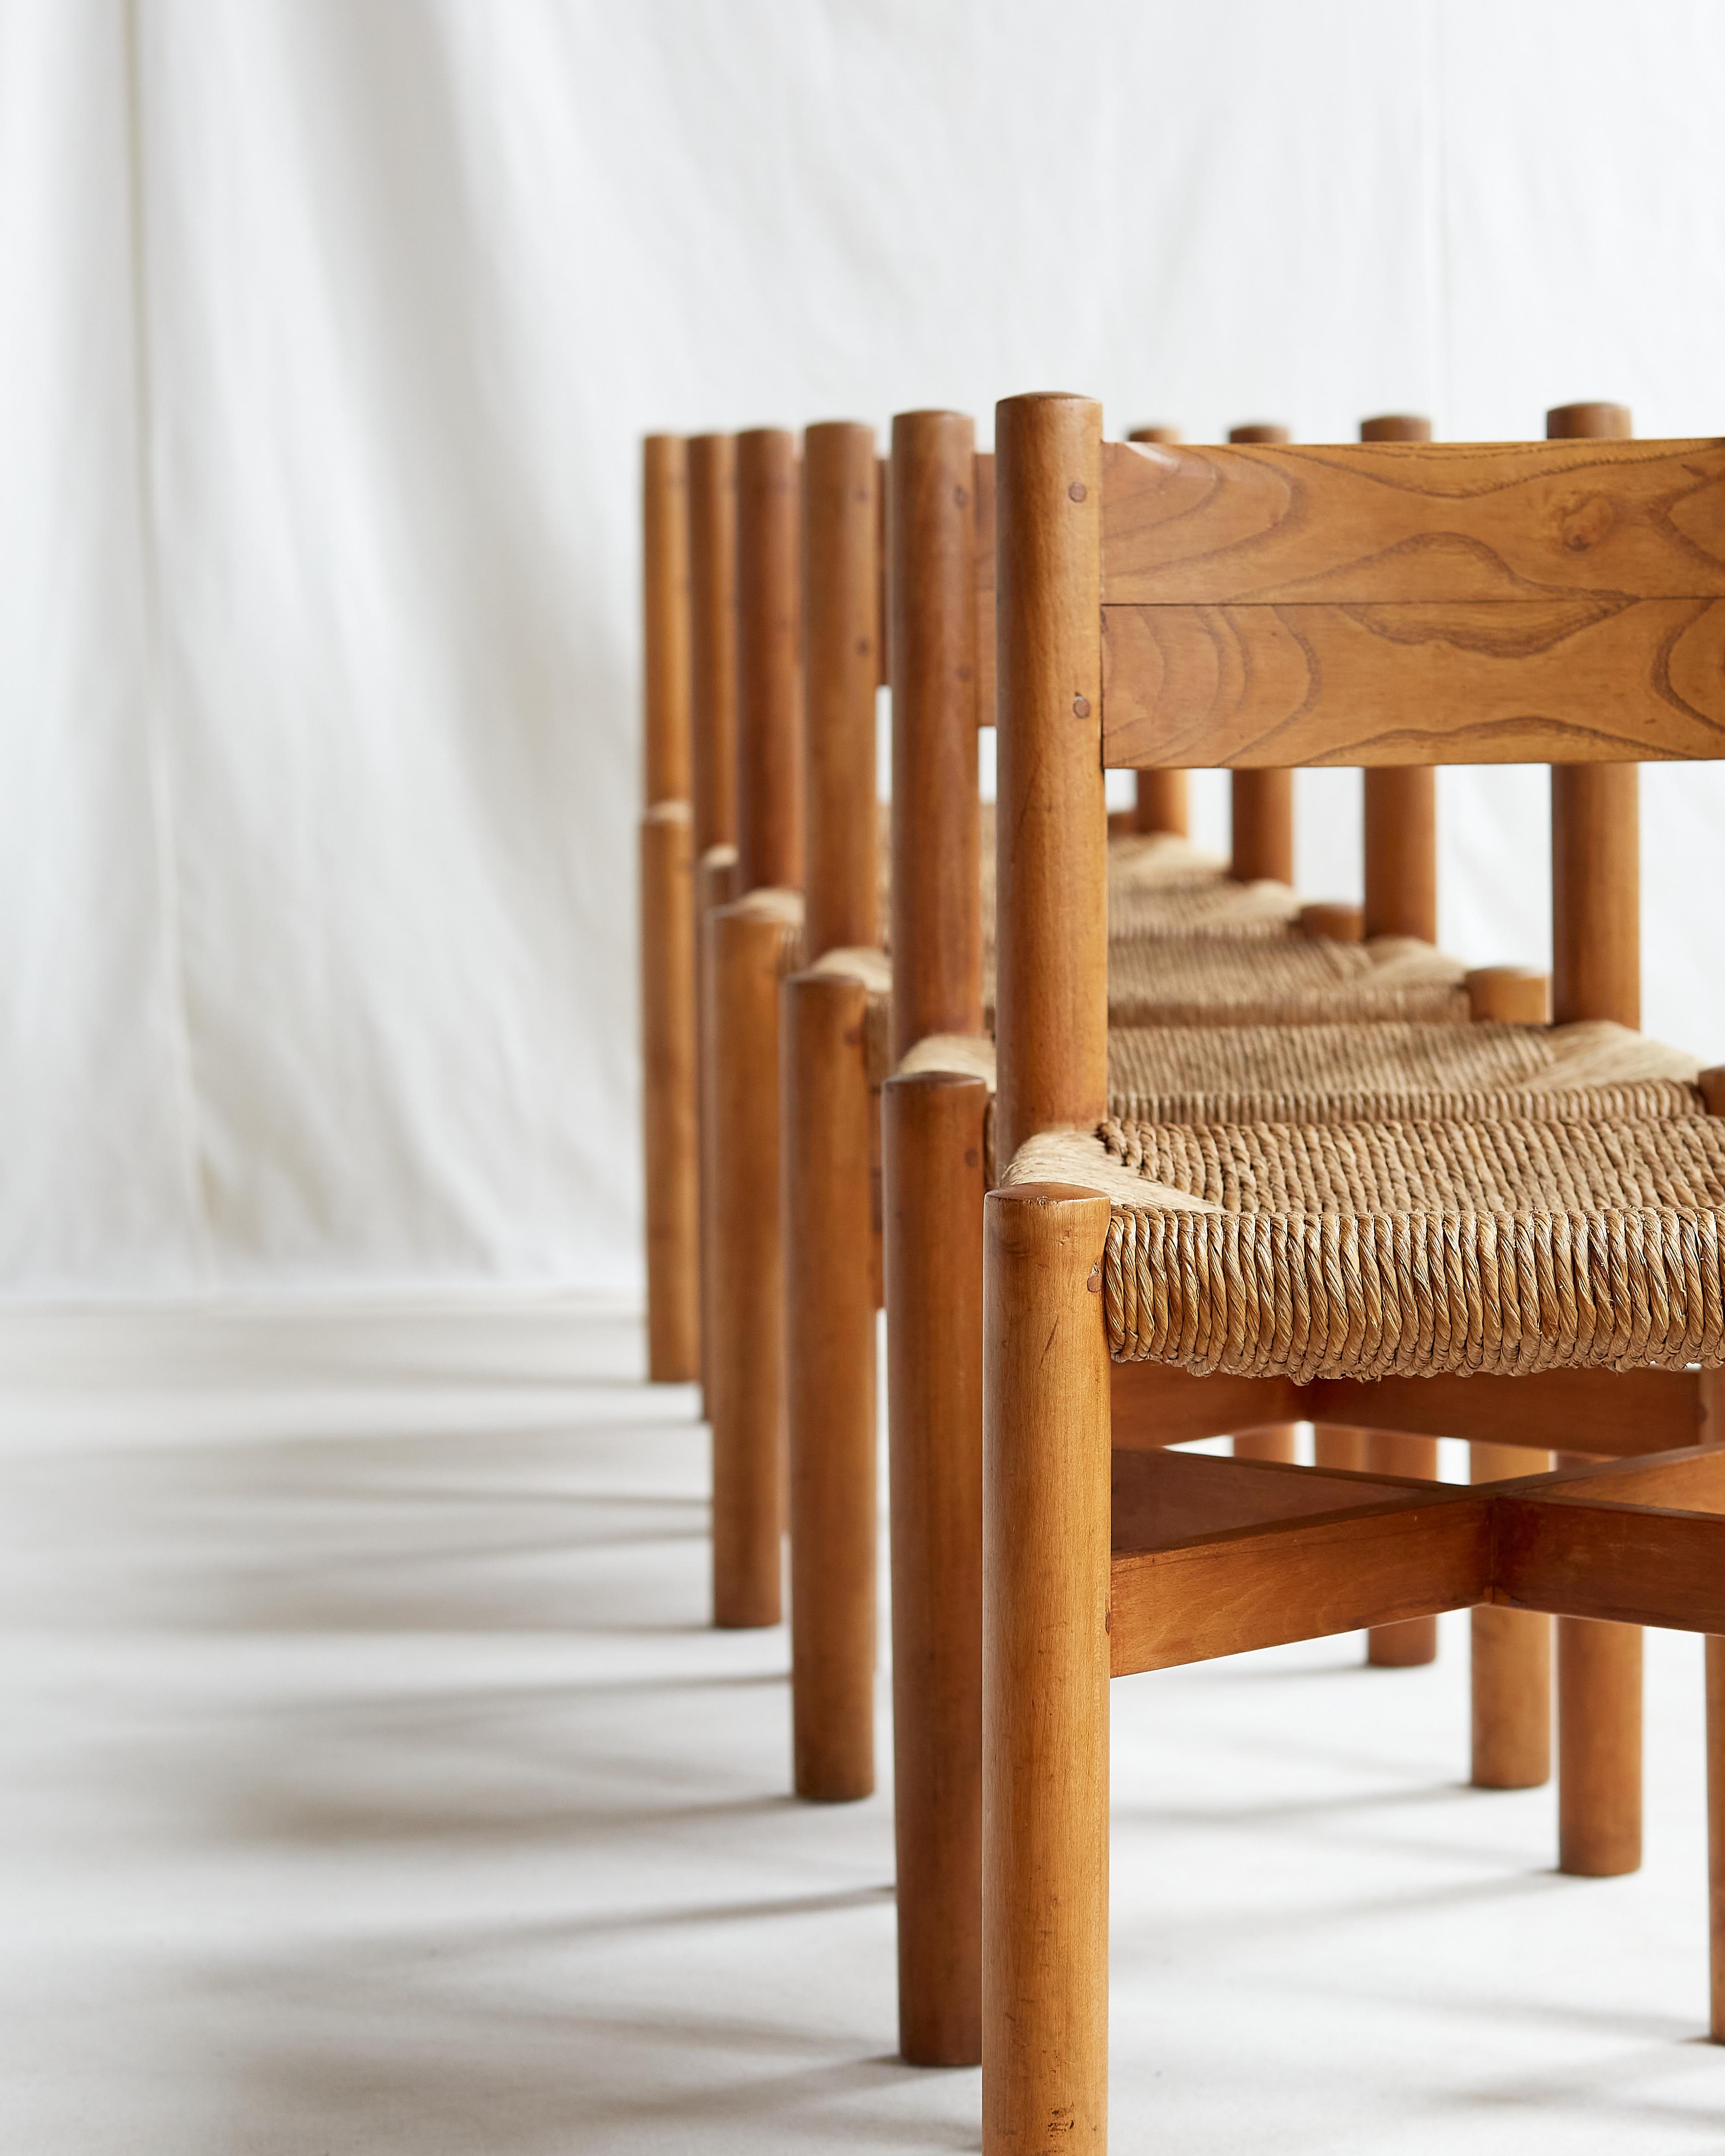 A rare set of six first production Charlotte Perriand Meribel chairs.

This set was produced by George Blanchon (B.C.B) circa 1948 and are completely original and untouched. The patina is beautiful. The back leg has a slight bend which is unique